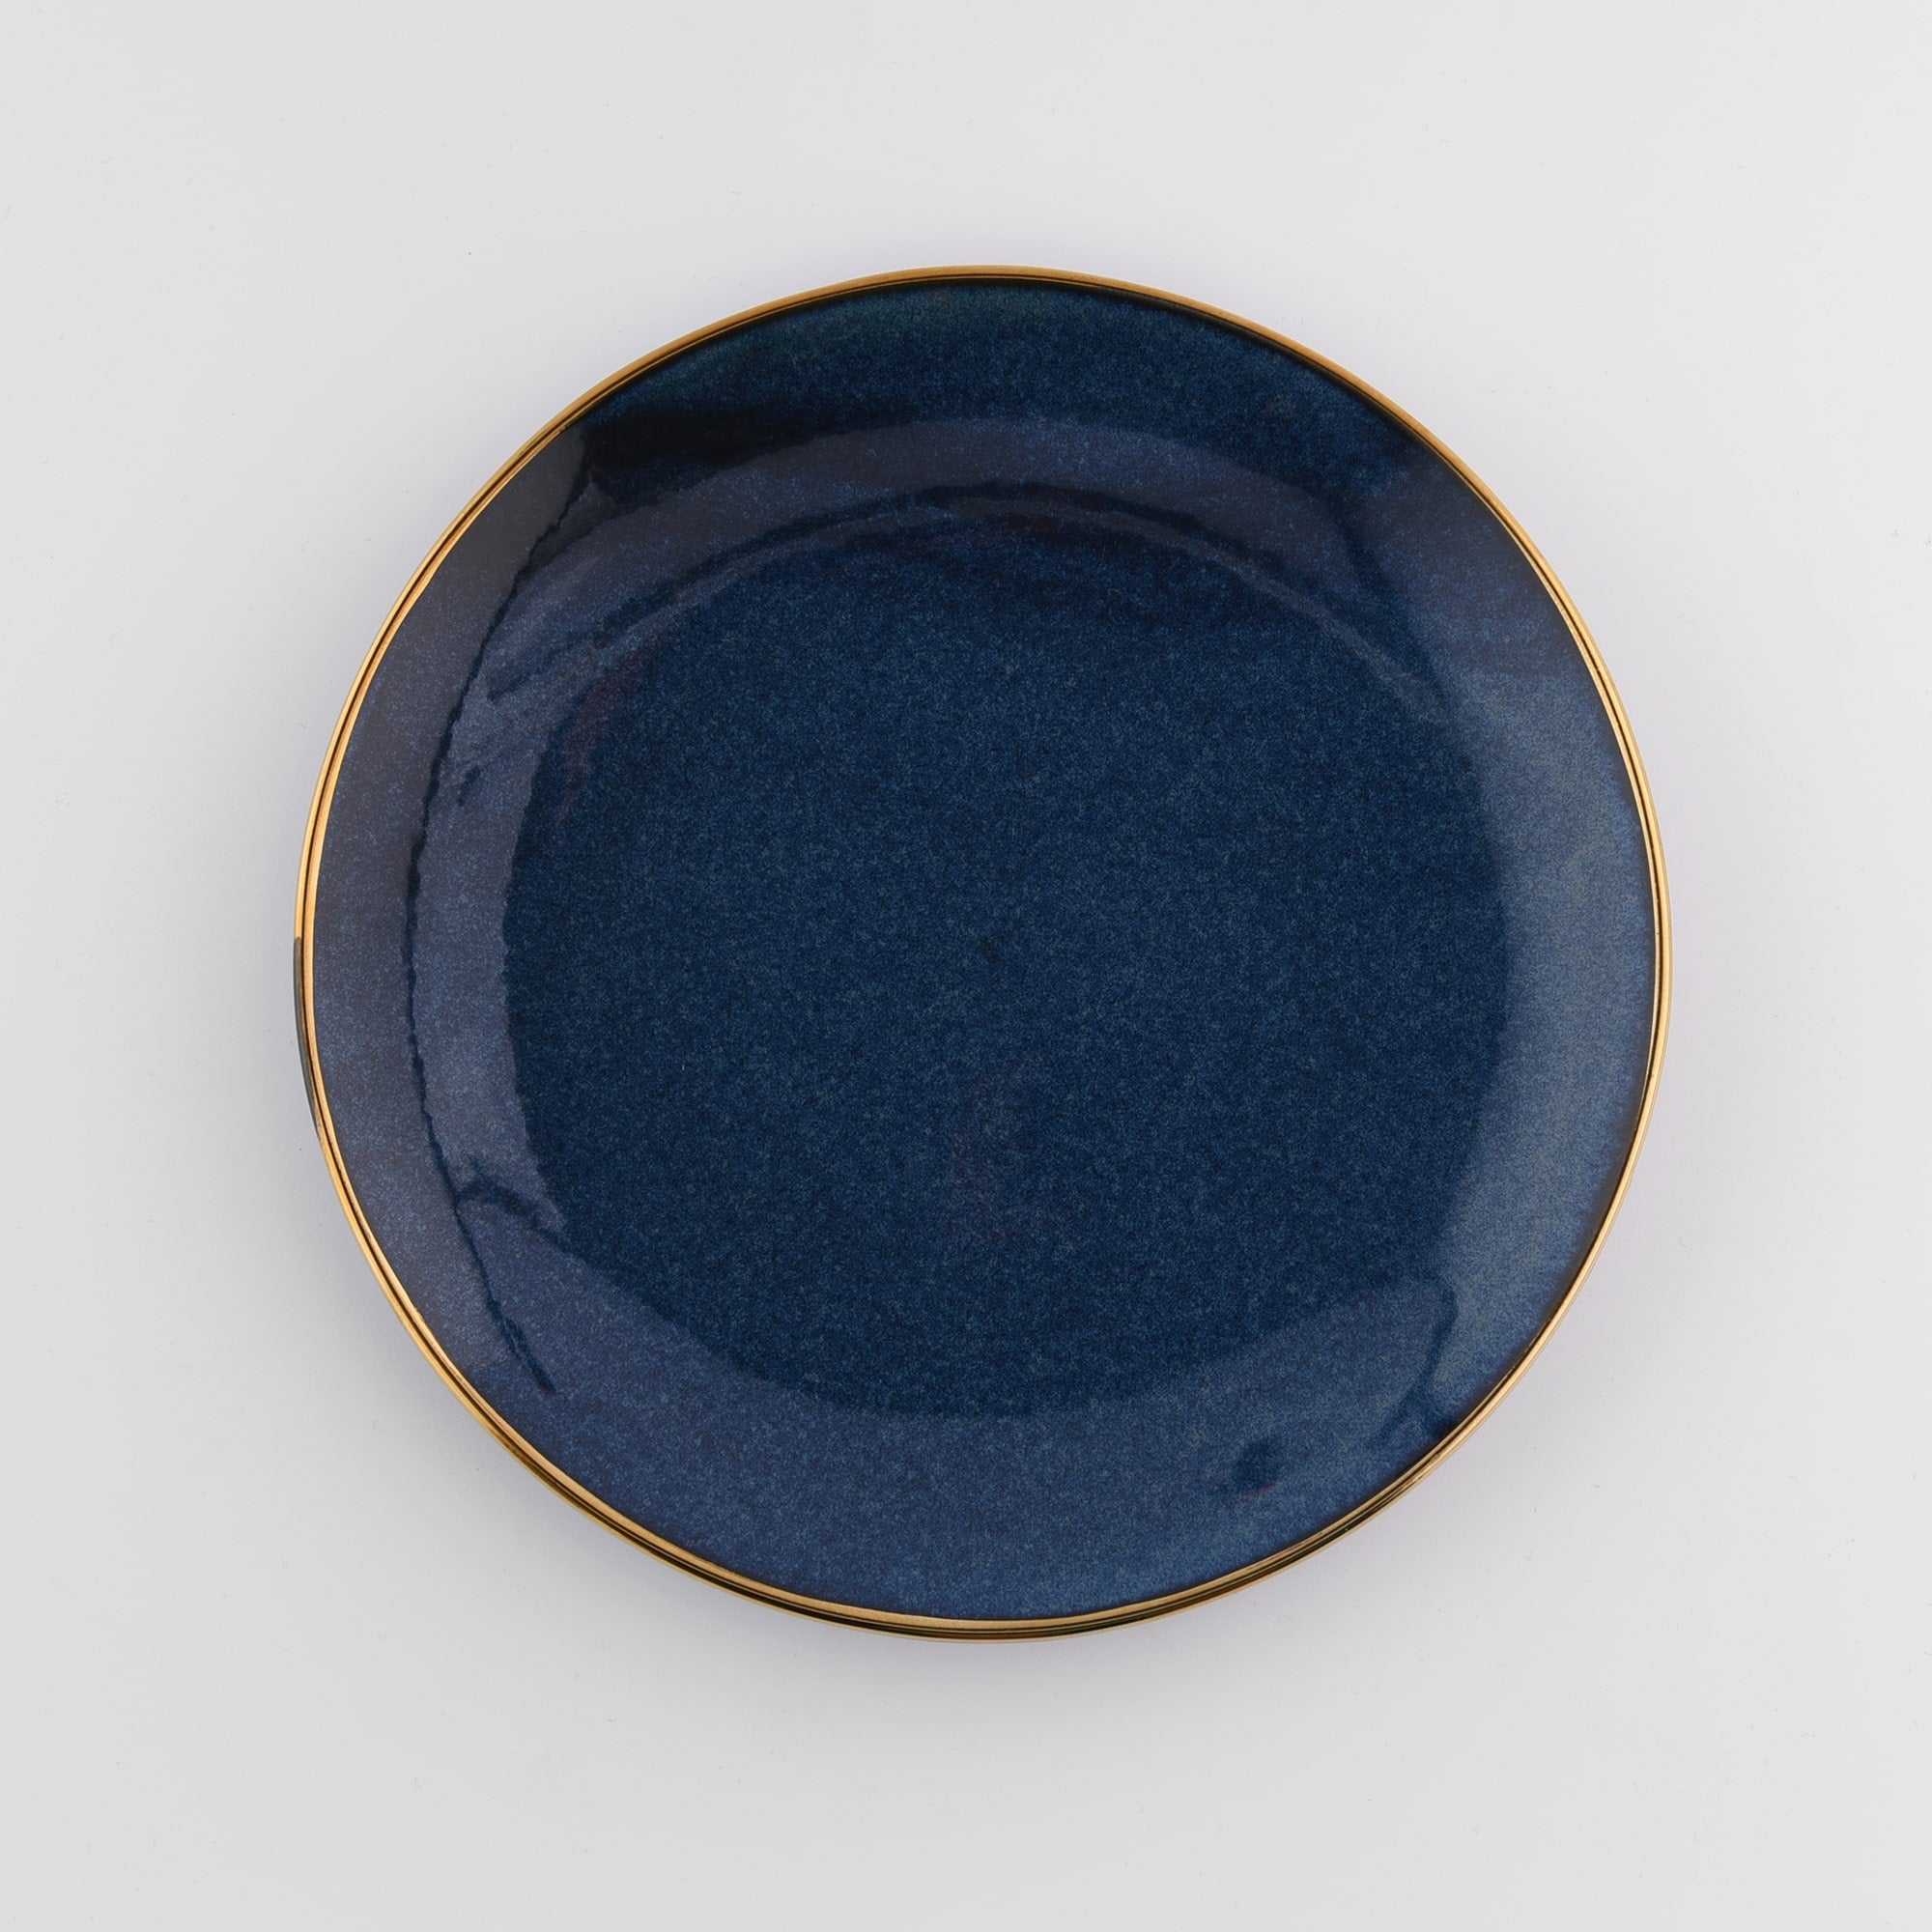 8-Inch Navy Stoneware Plate with Gold Rim - Set of Four